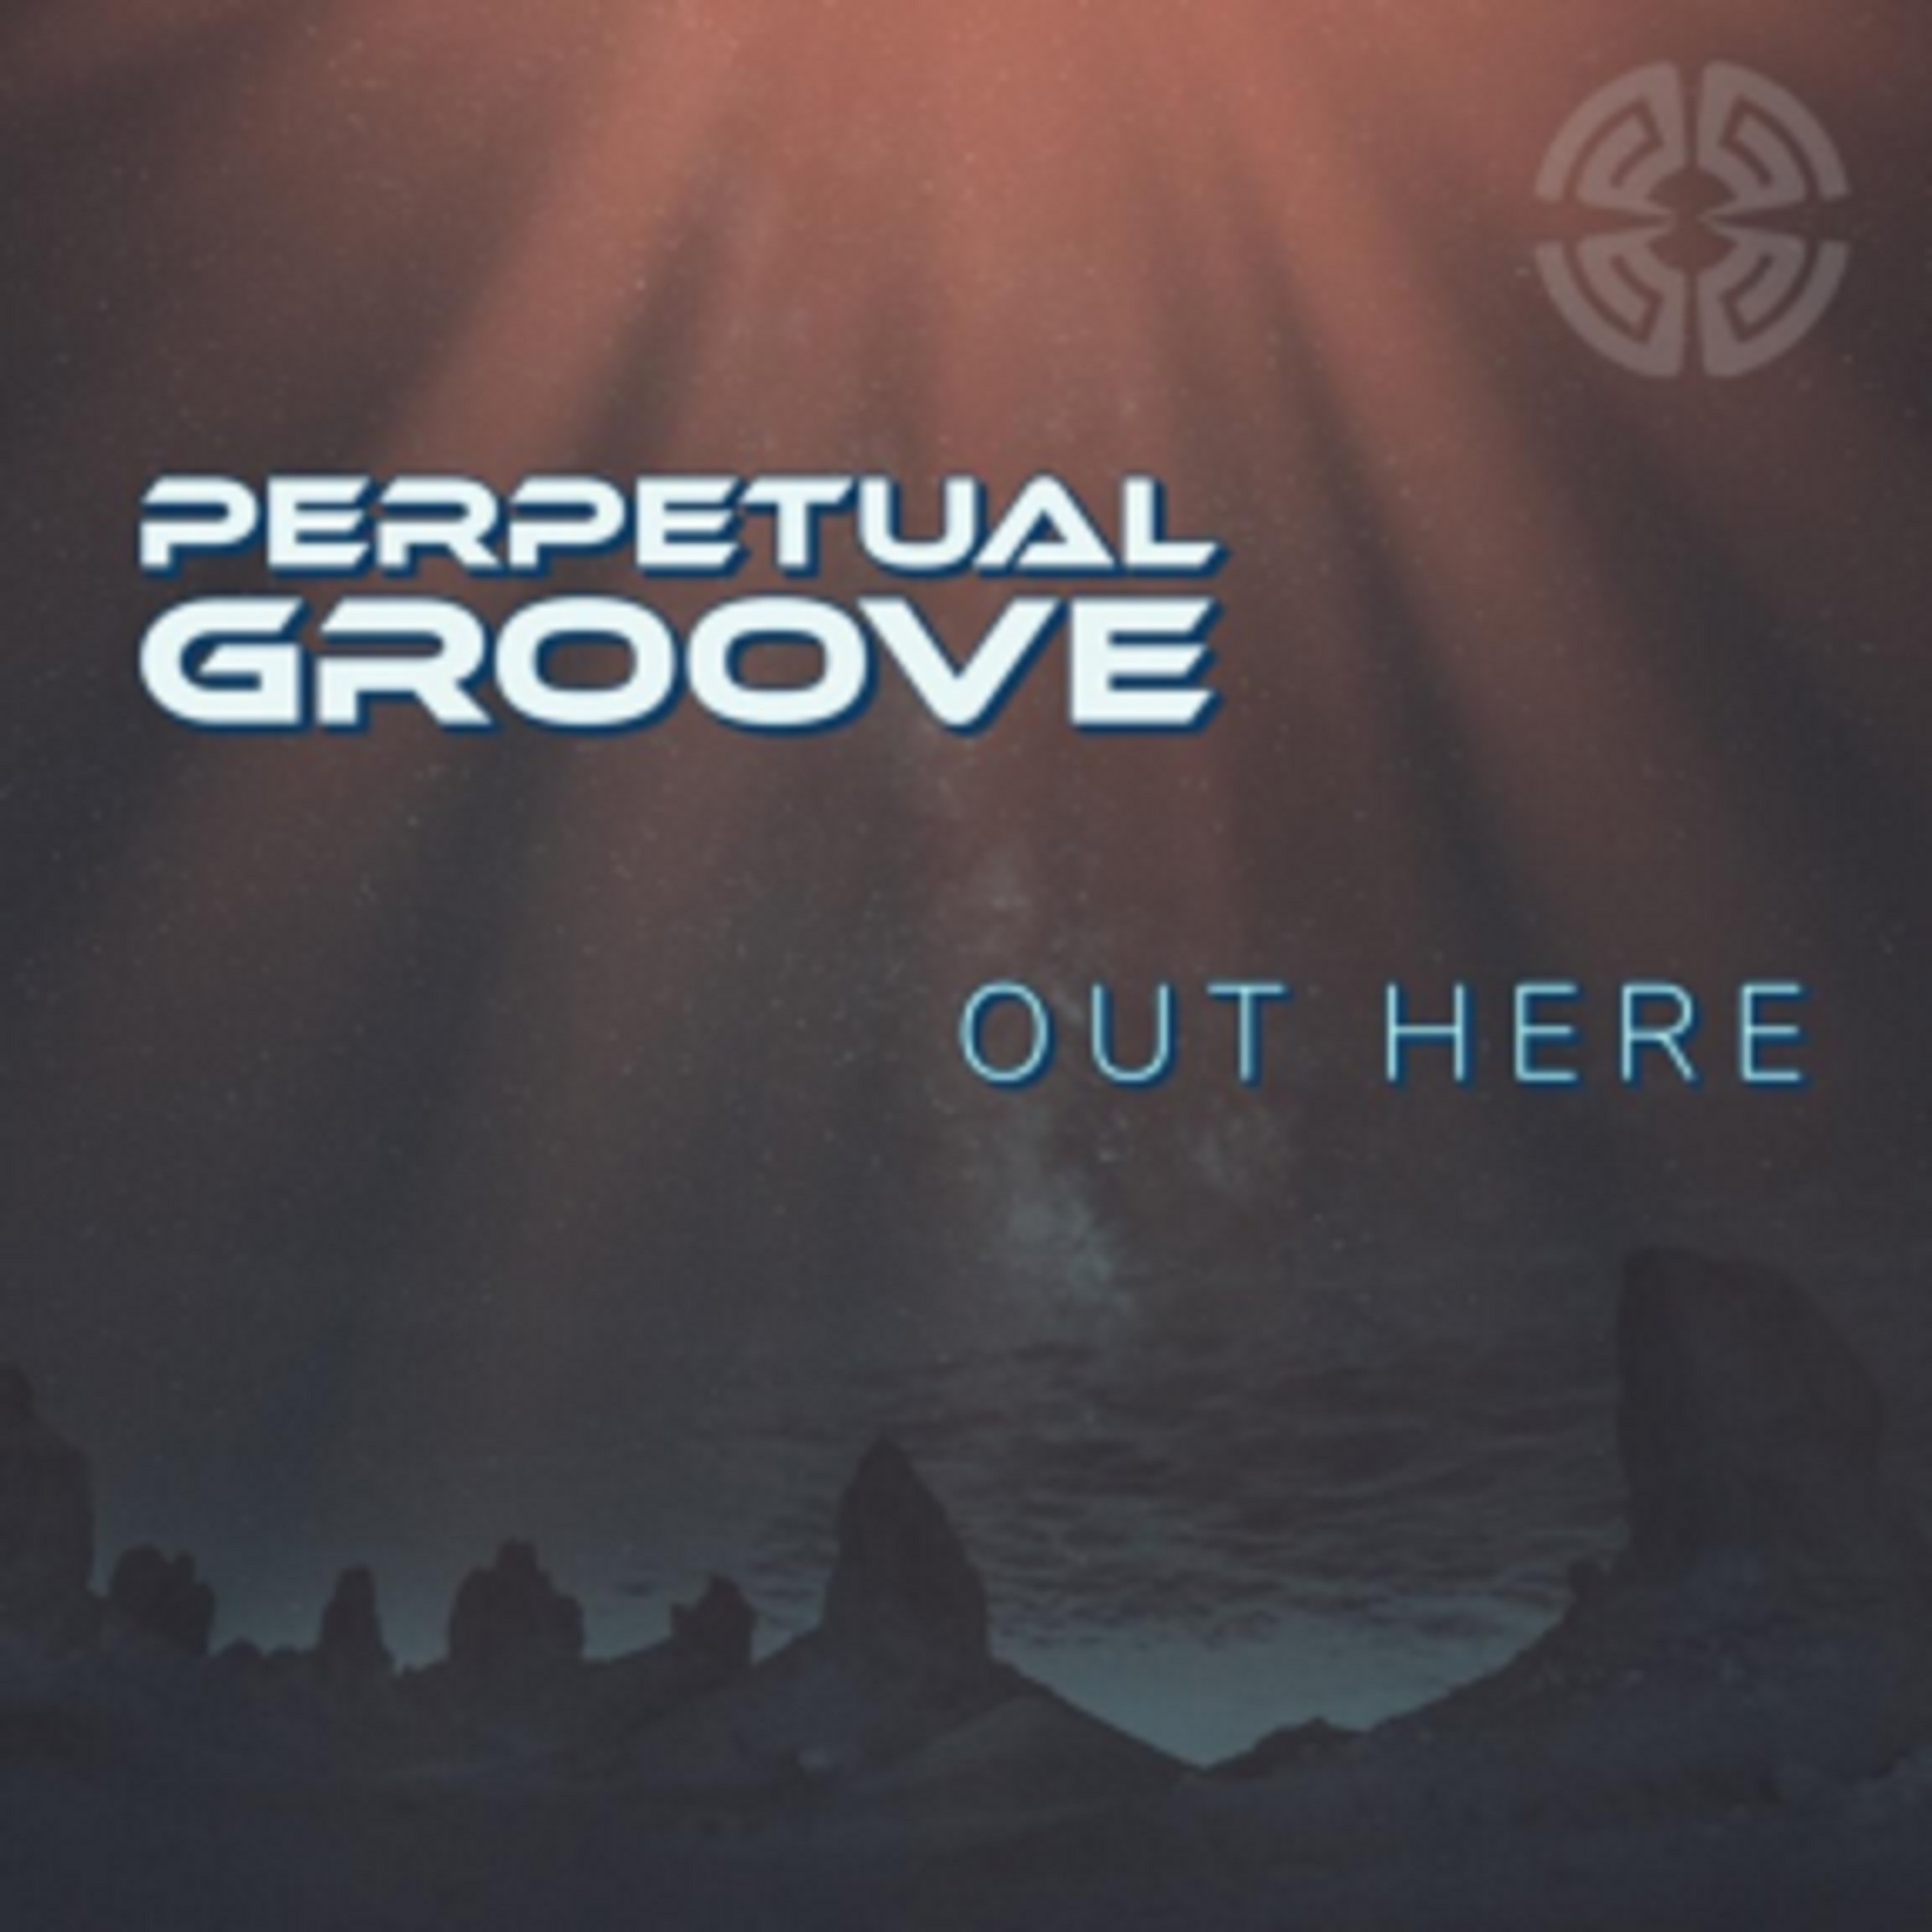 PERPETUAL GROOVE Shares New Single, “OUT HERE”